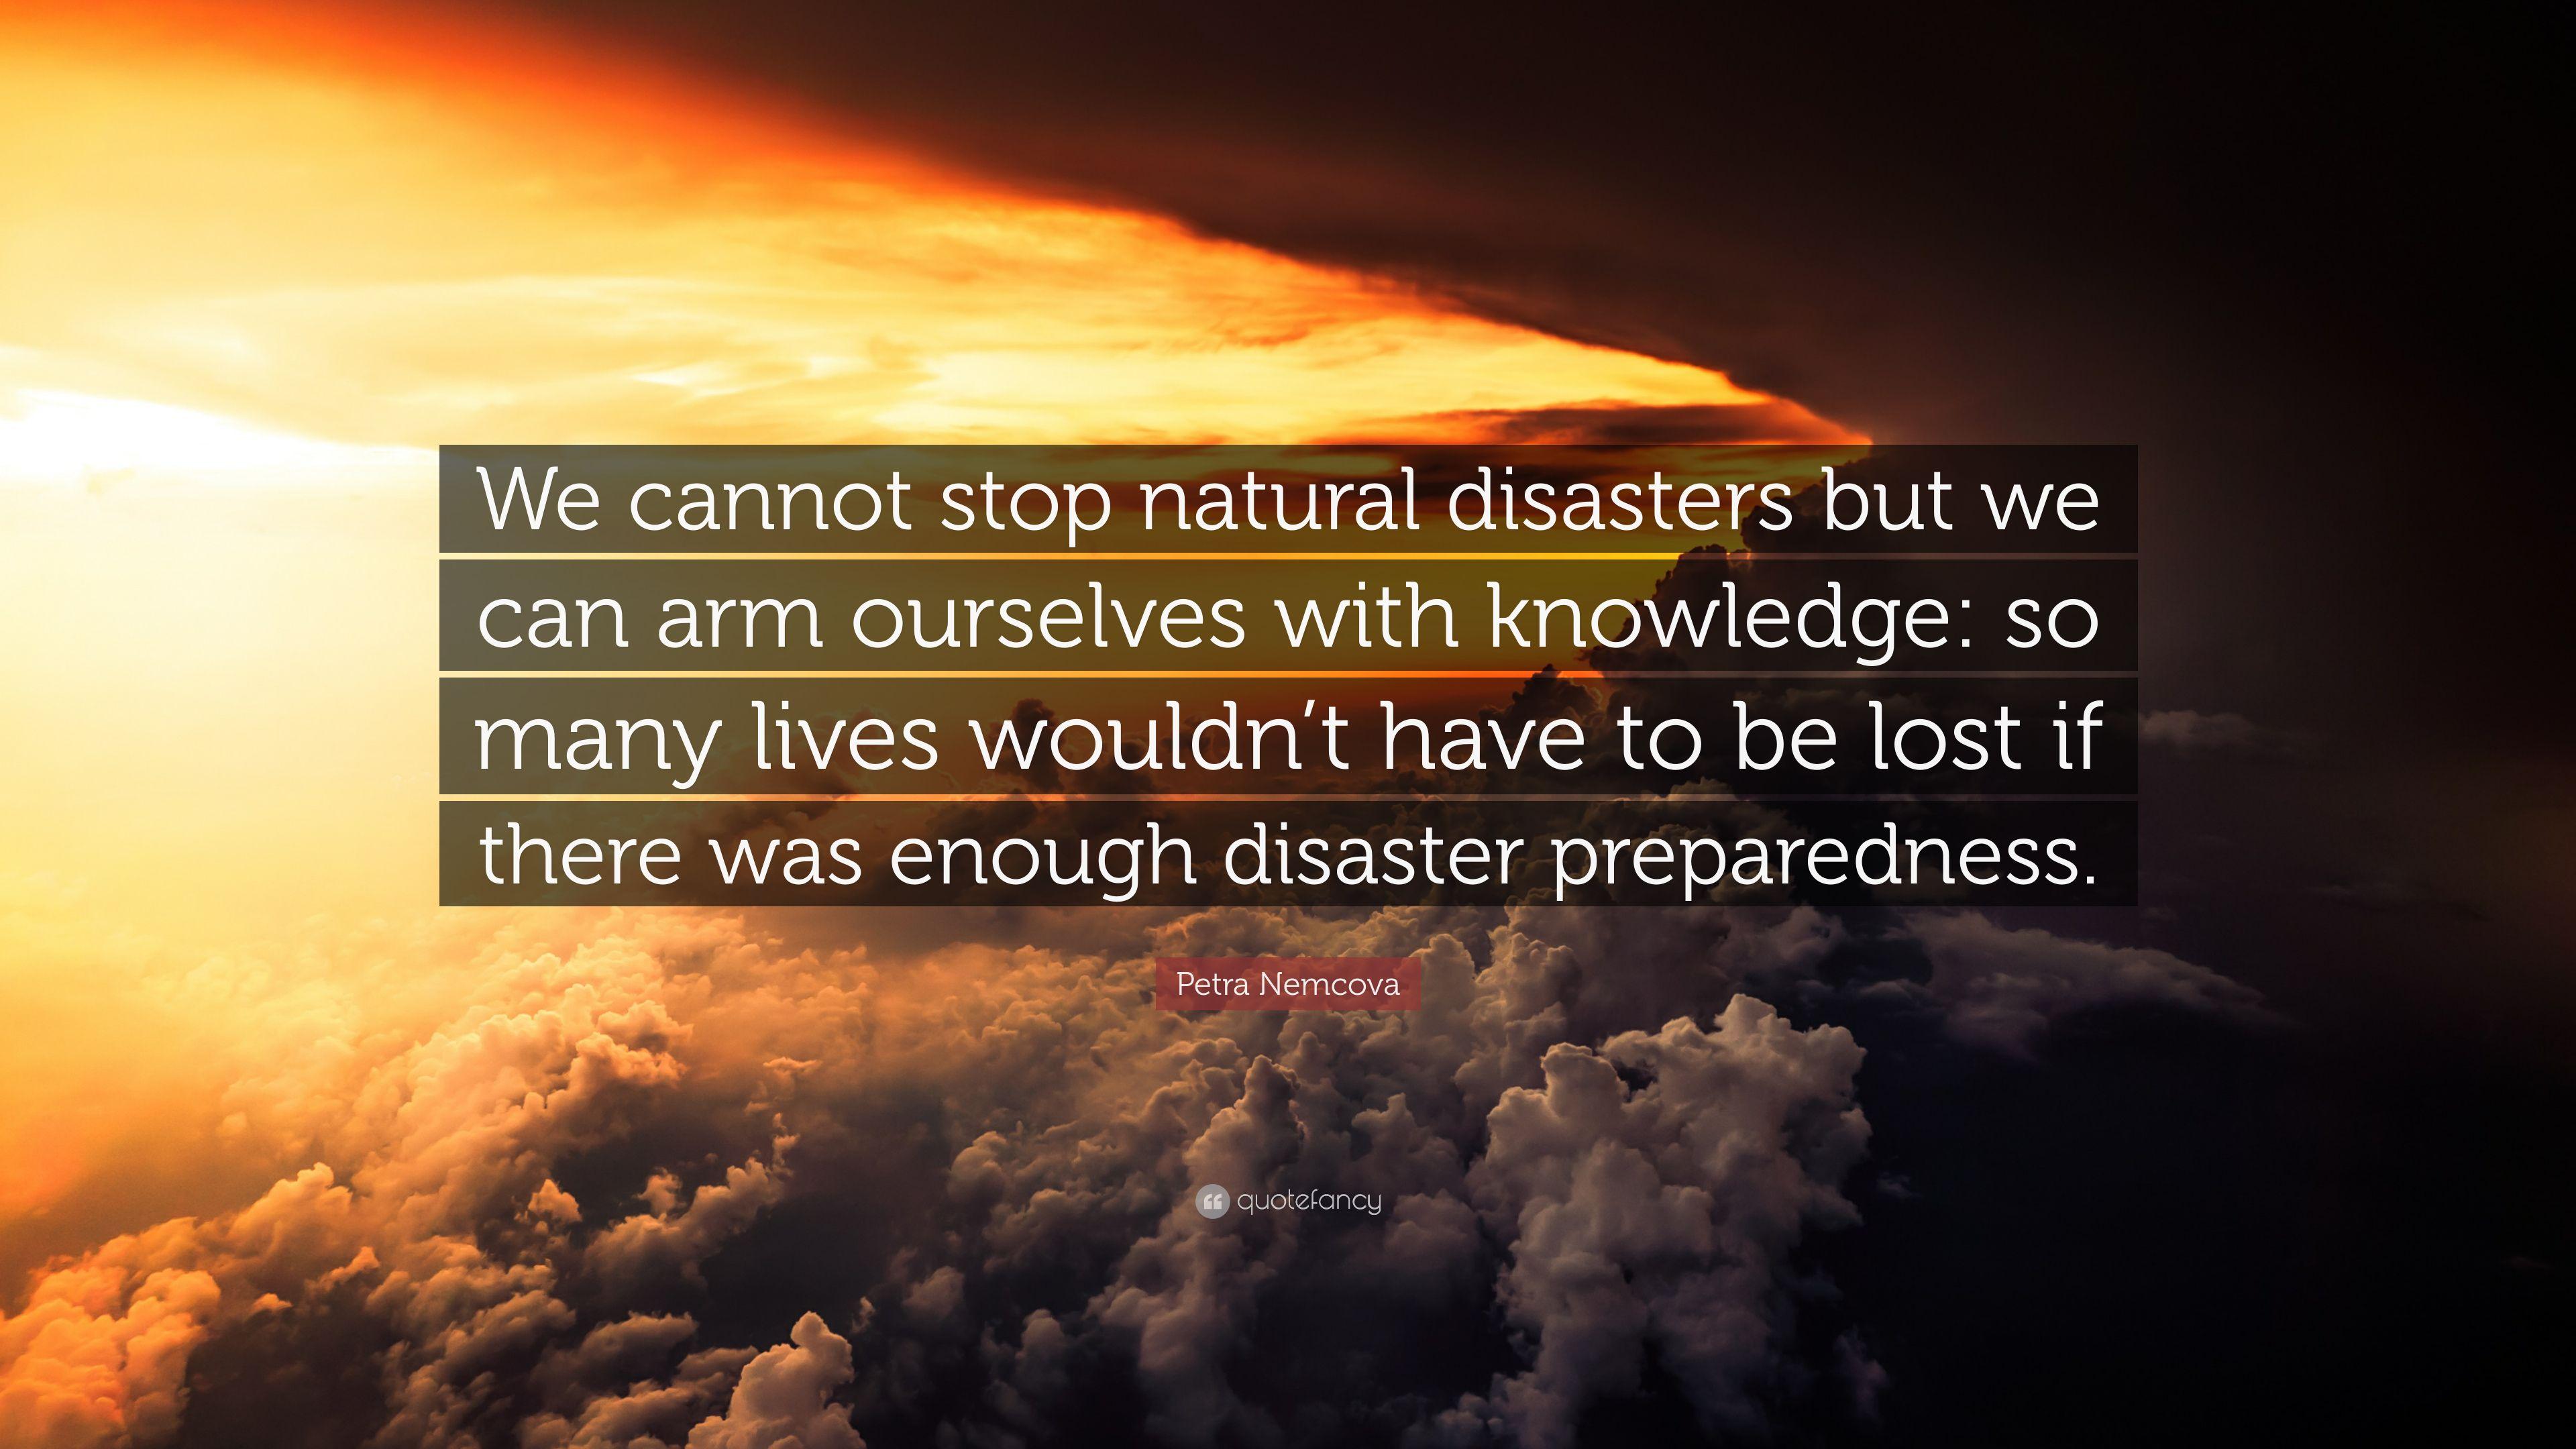 Petra Nemcova Quote: “We cannot stop natural disasters but we can